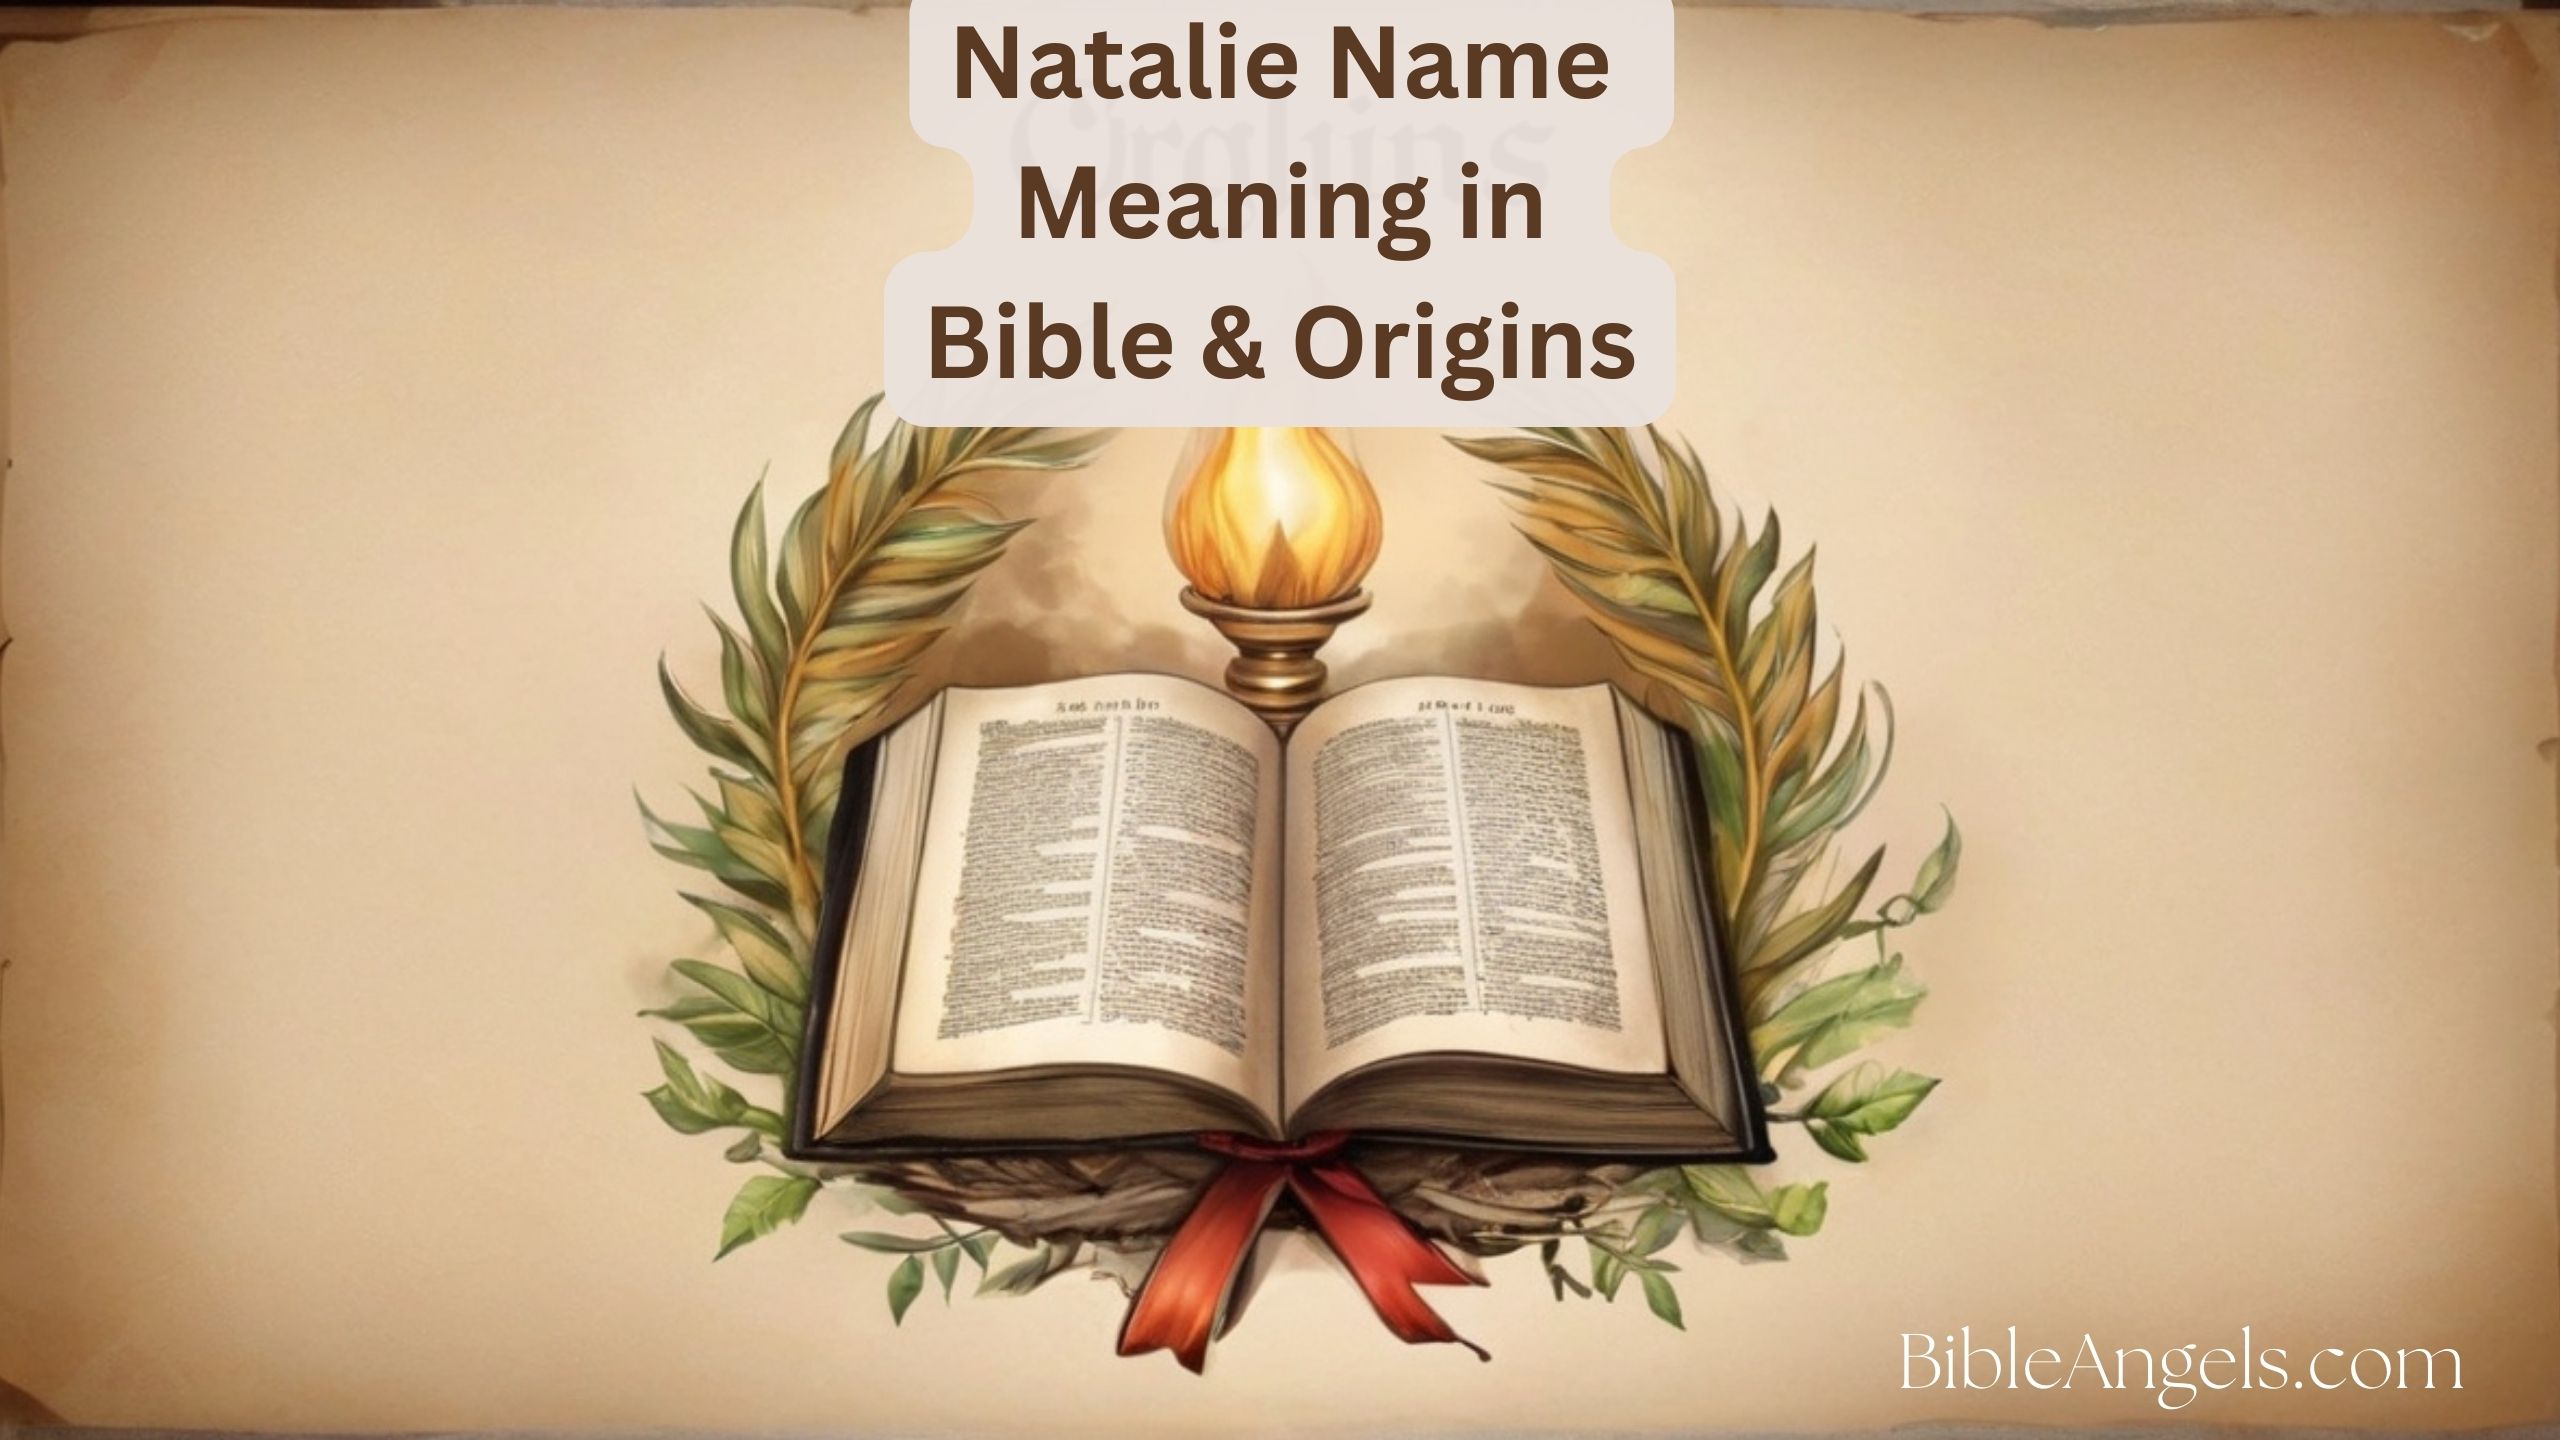 Natalie Name Meaning in Bible & Origins